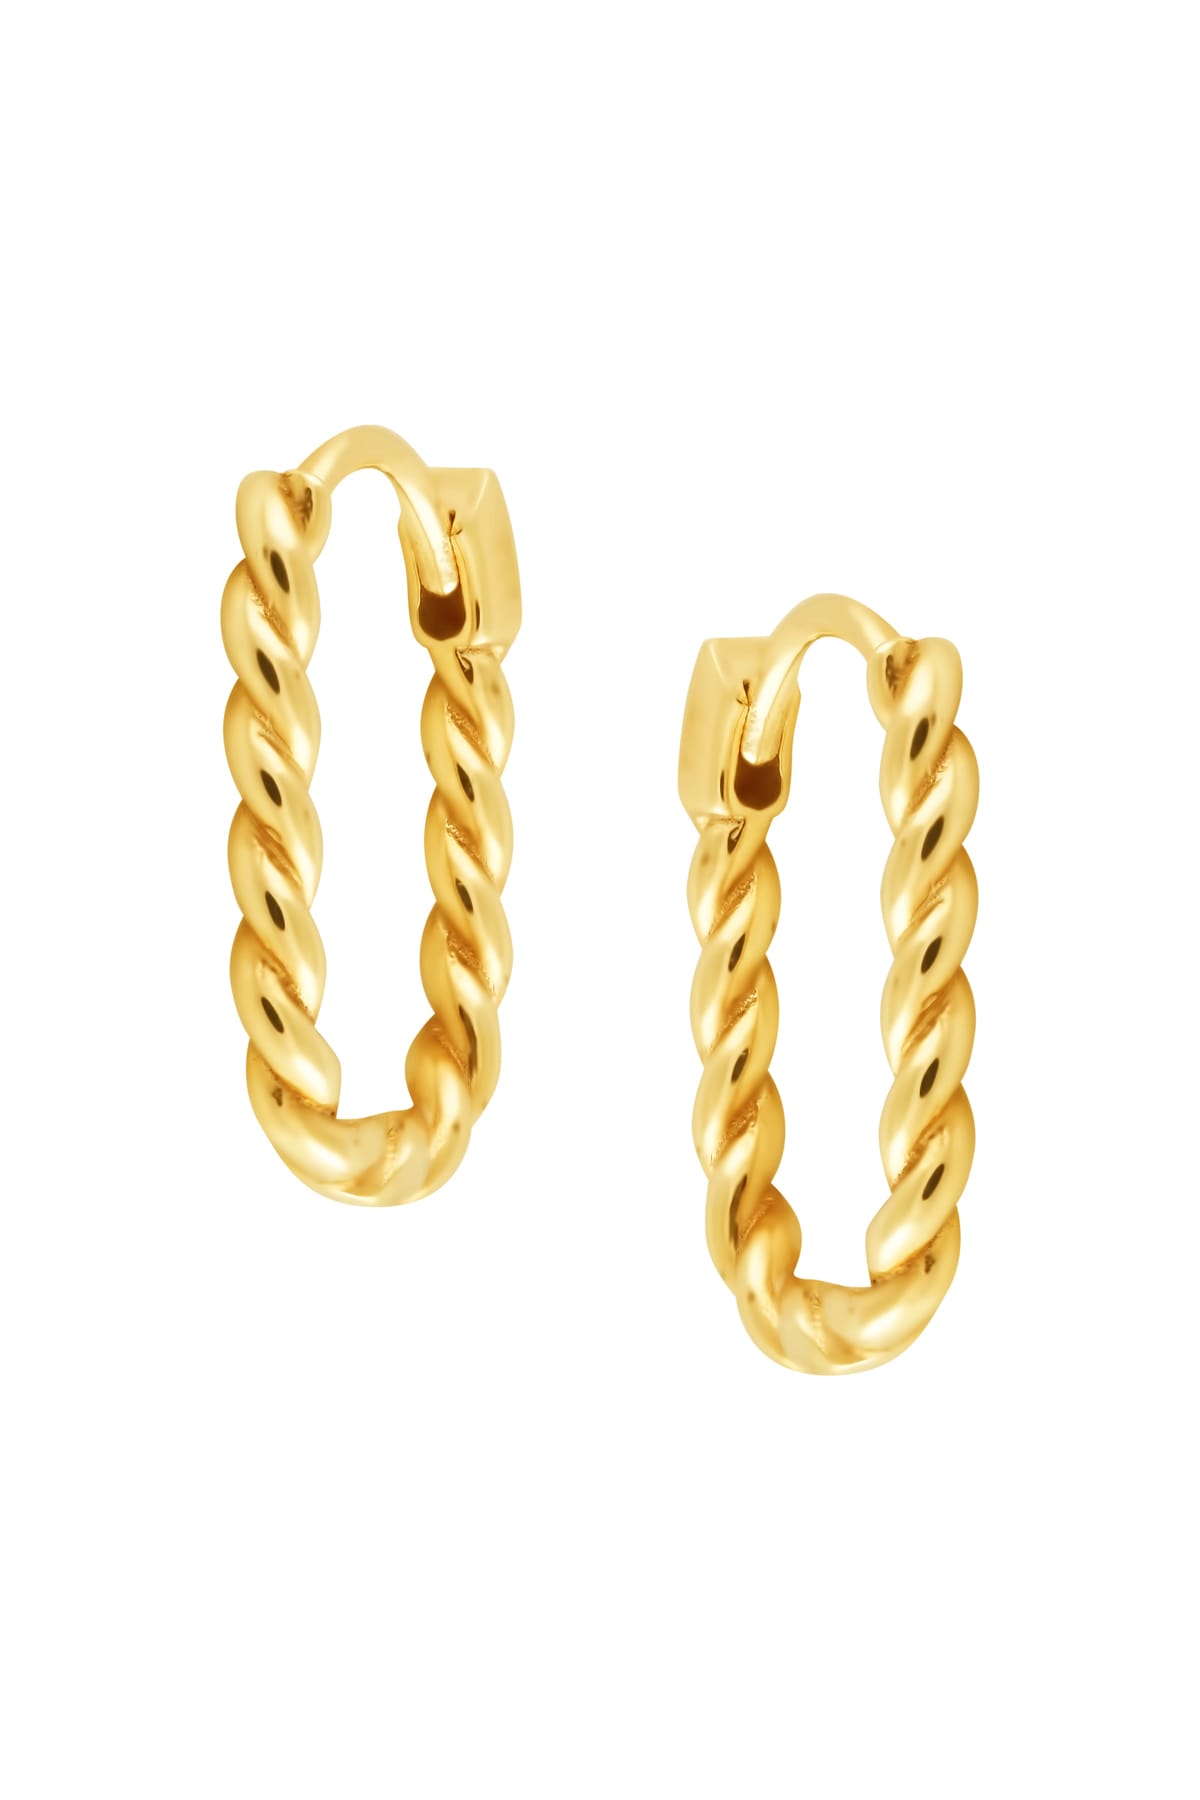 Rectangle Shaped Twisted Gold Huggie Earrings from LeGassick Jewellery Gold Coast.